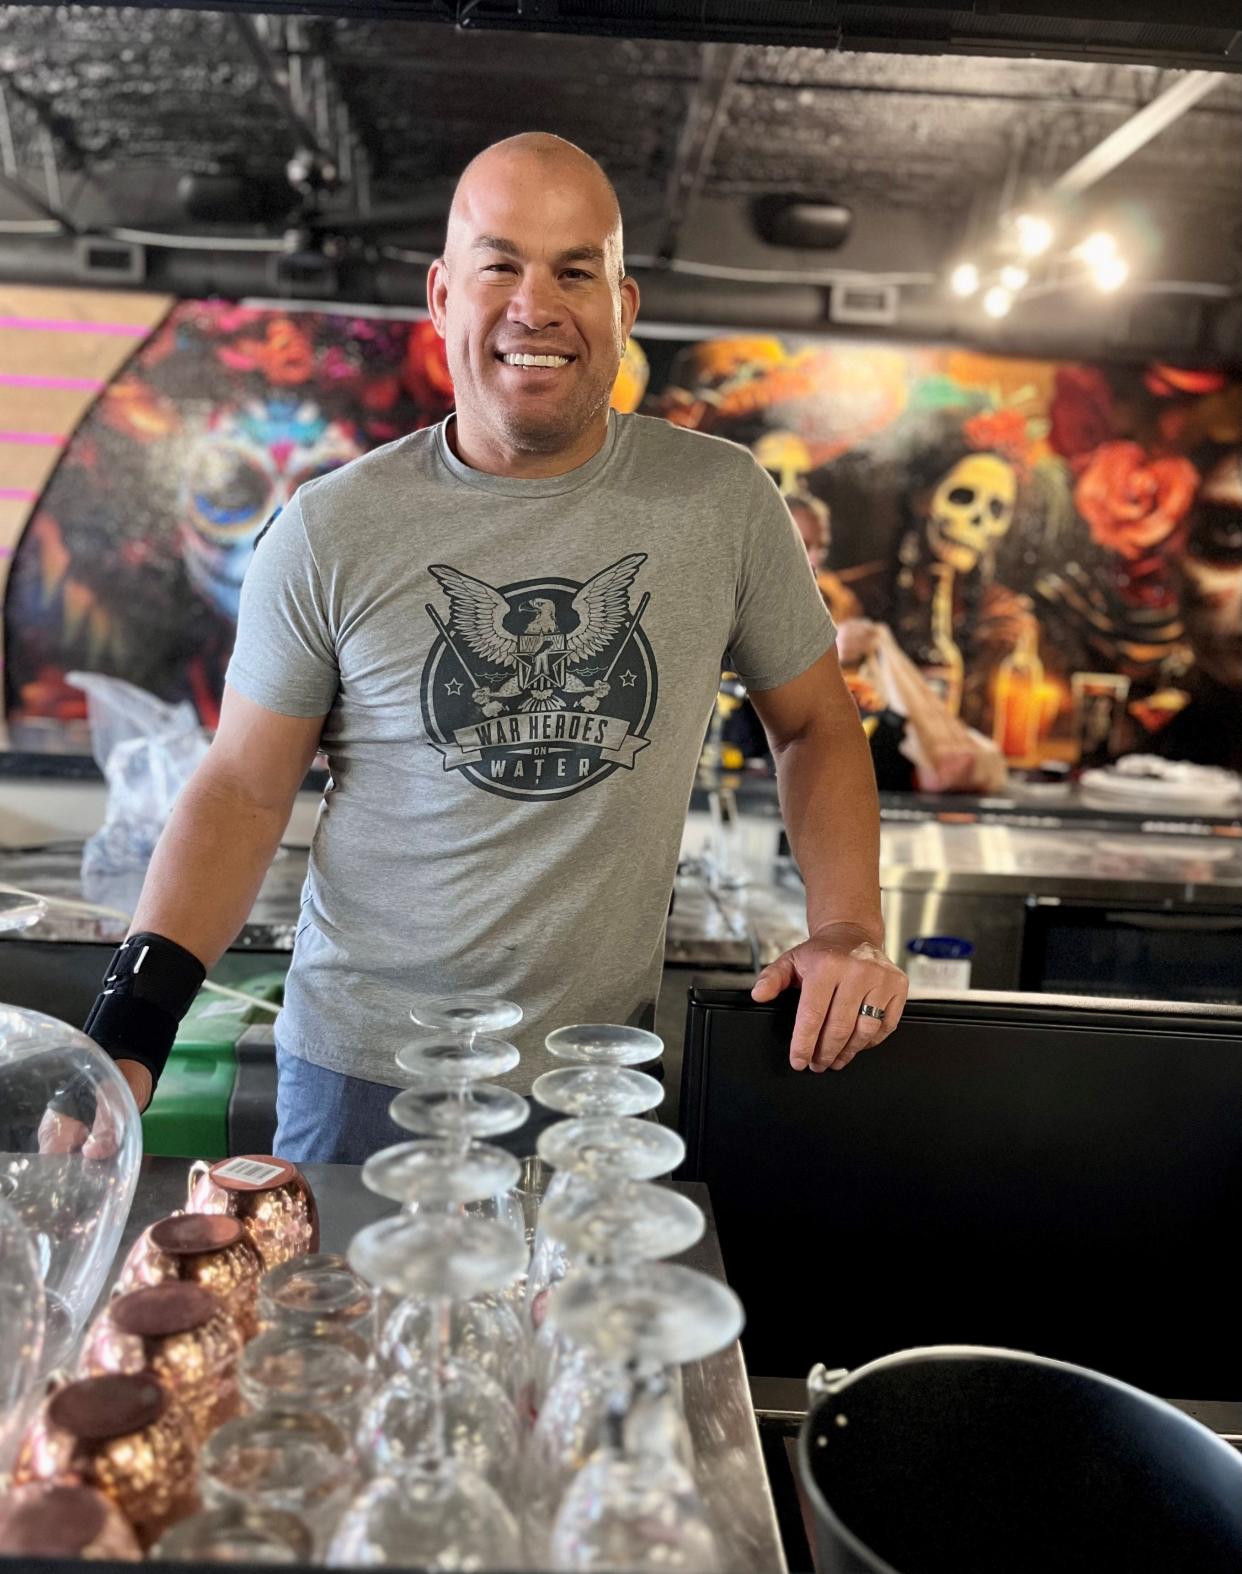 UFC Hall of Famer Tito Ortiz stands behind the bar of Tito's Cantina, his first restaurant, in Cape Coral.